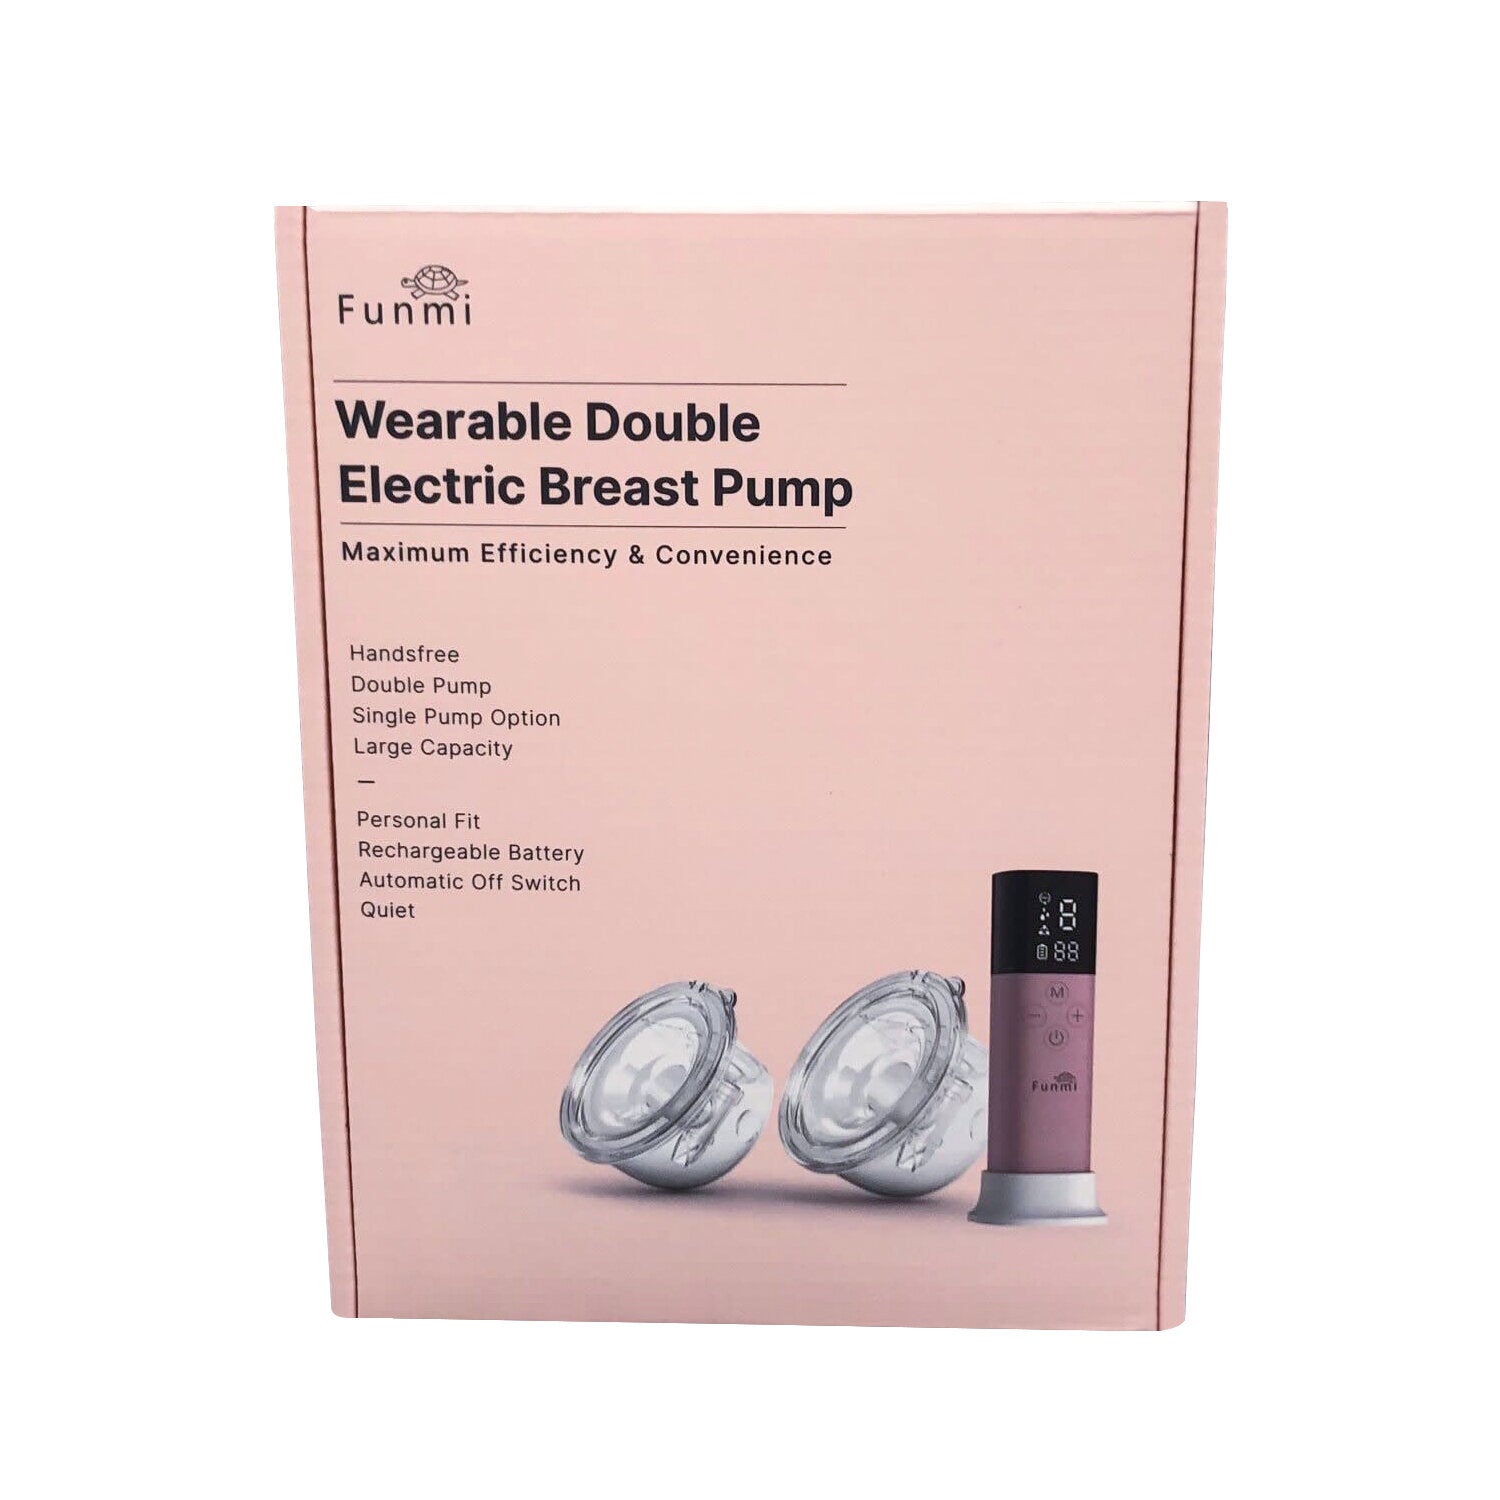 Funmi Wearable Double Electric Breast Pump product packaging